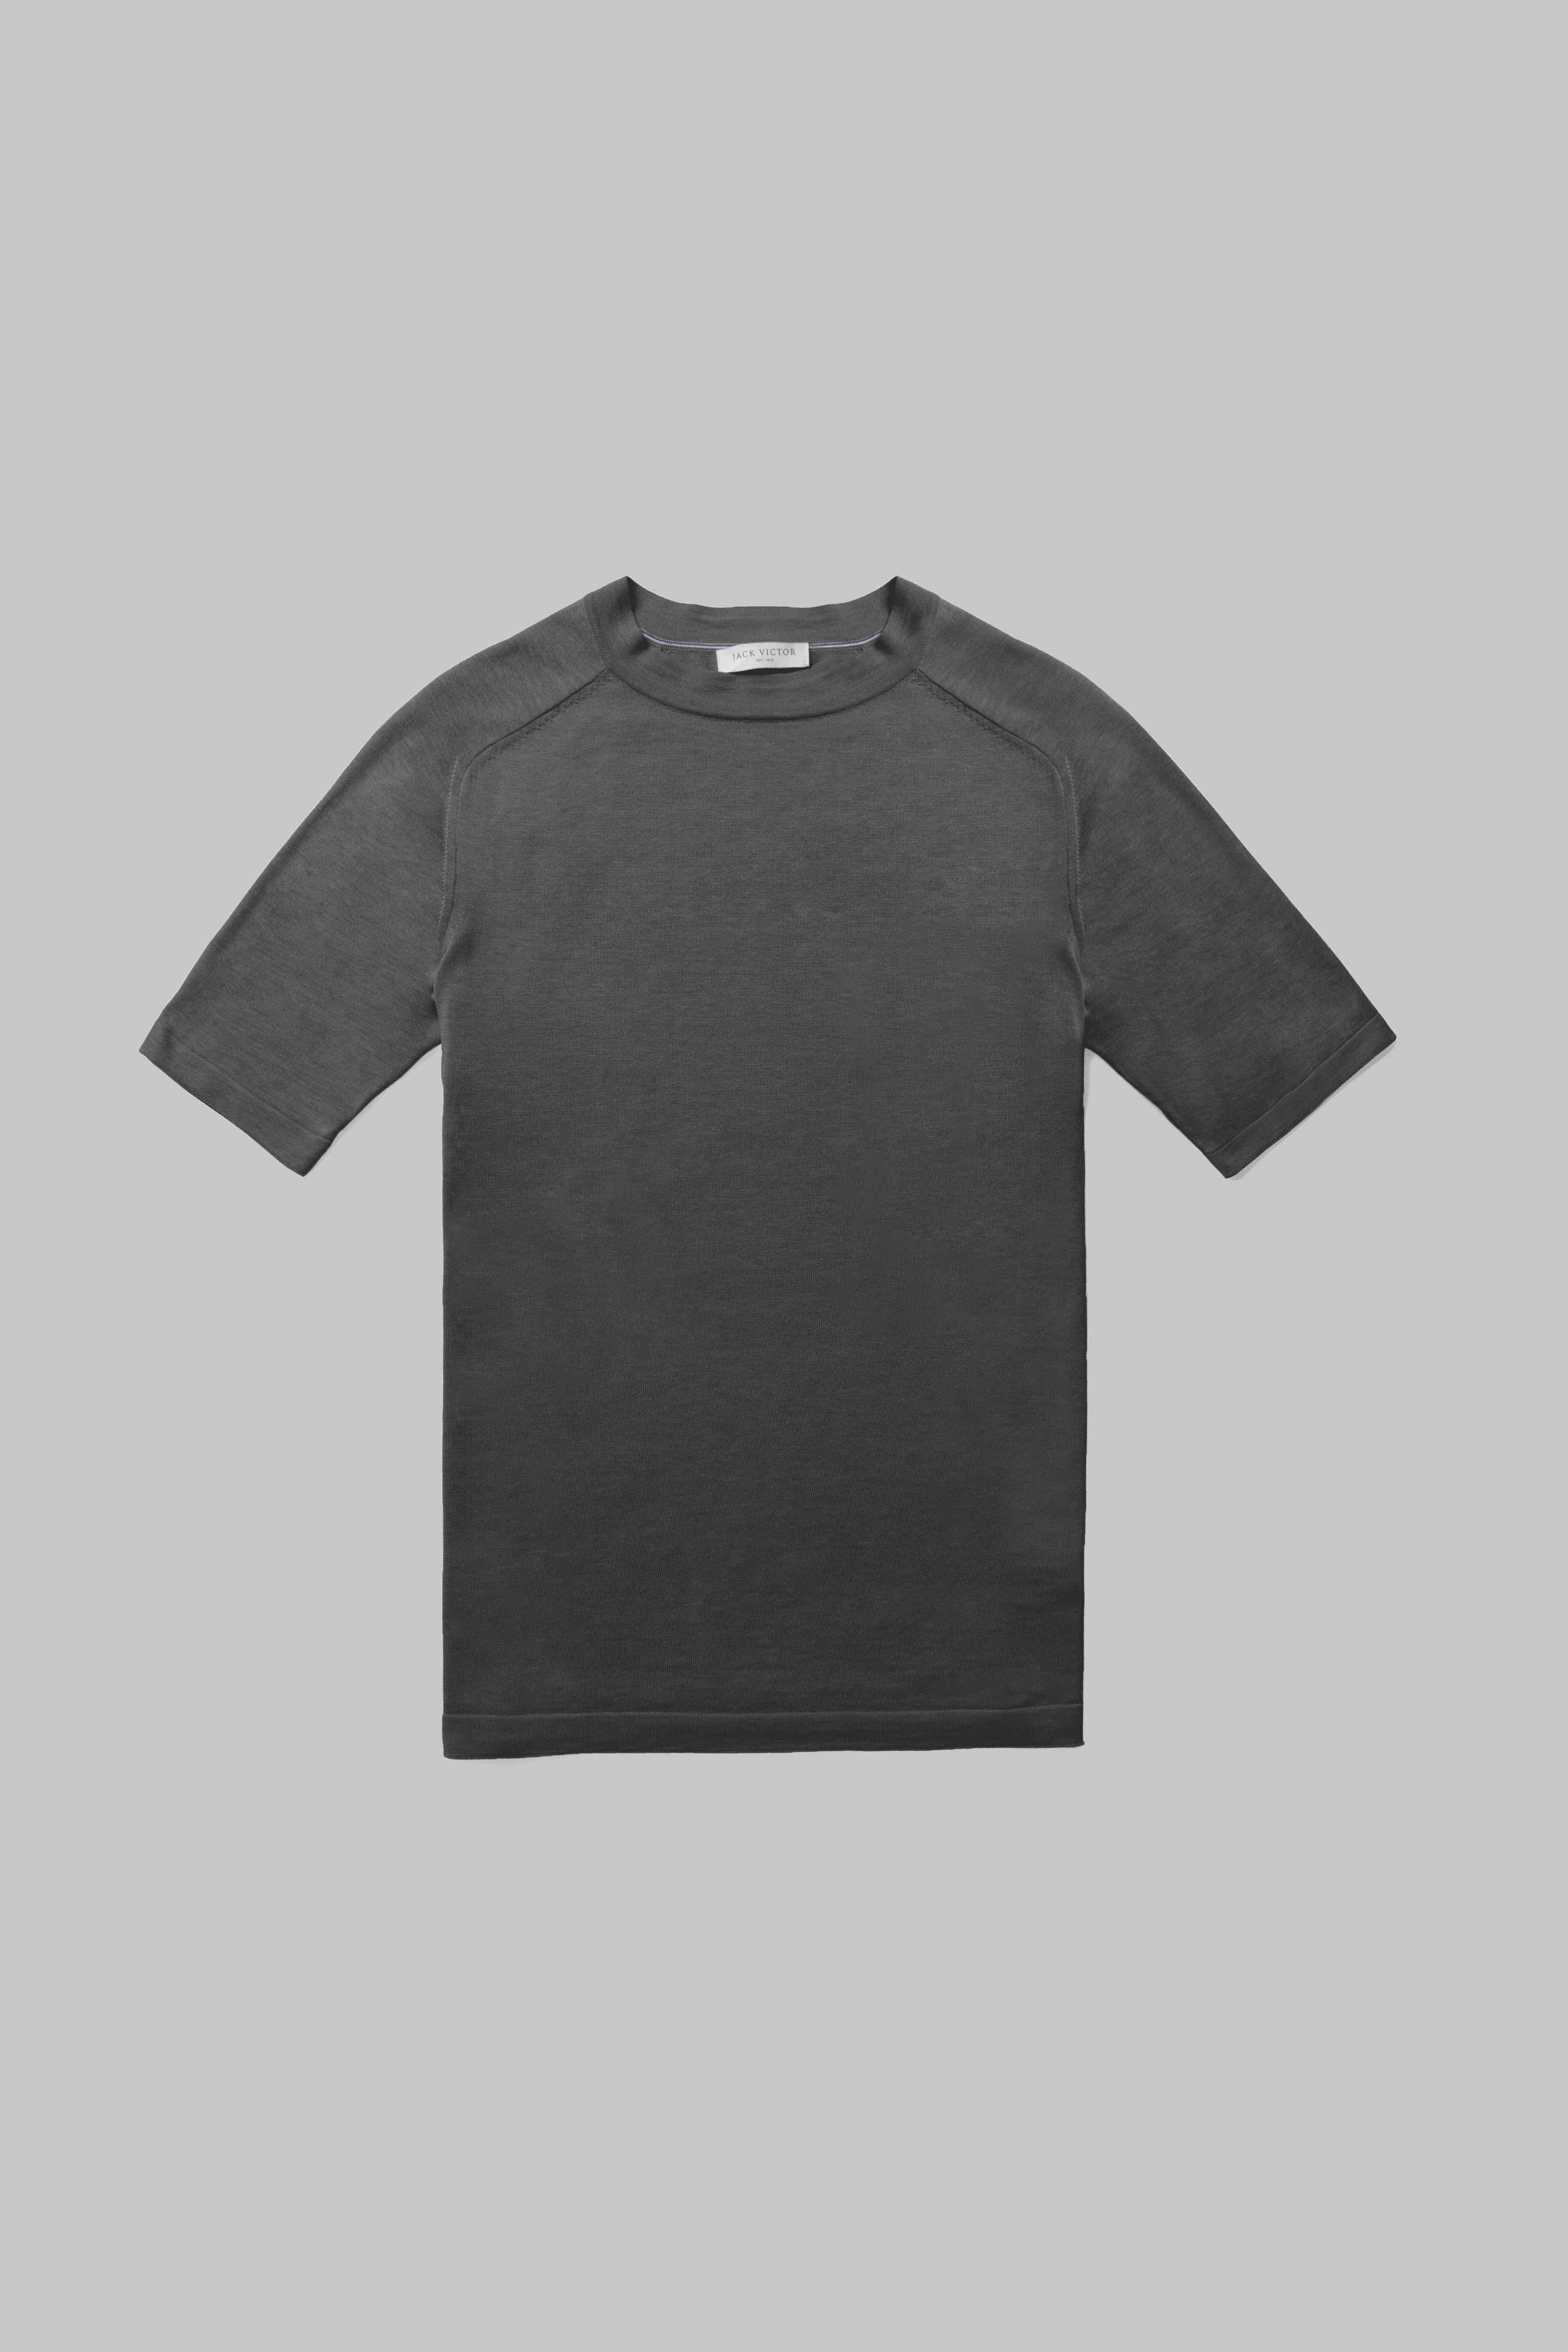 Alt view 5 SetiCo Cotton and Silk Knit Crew Neck in Grey